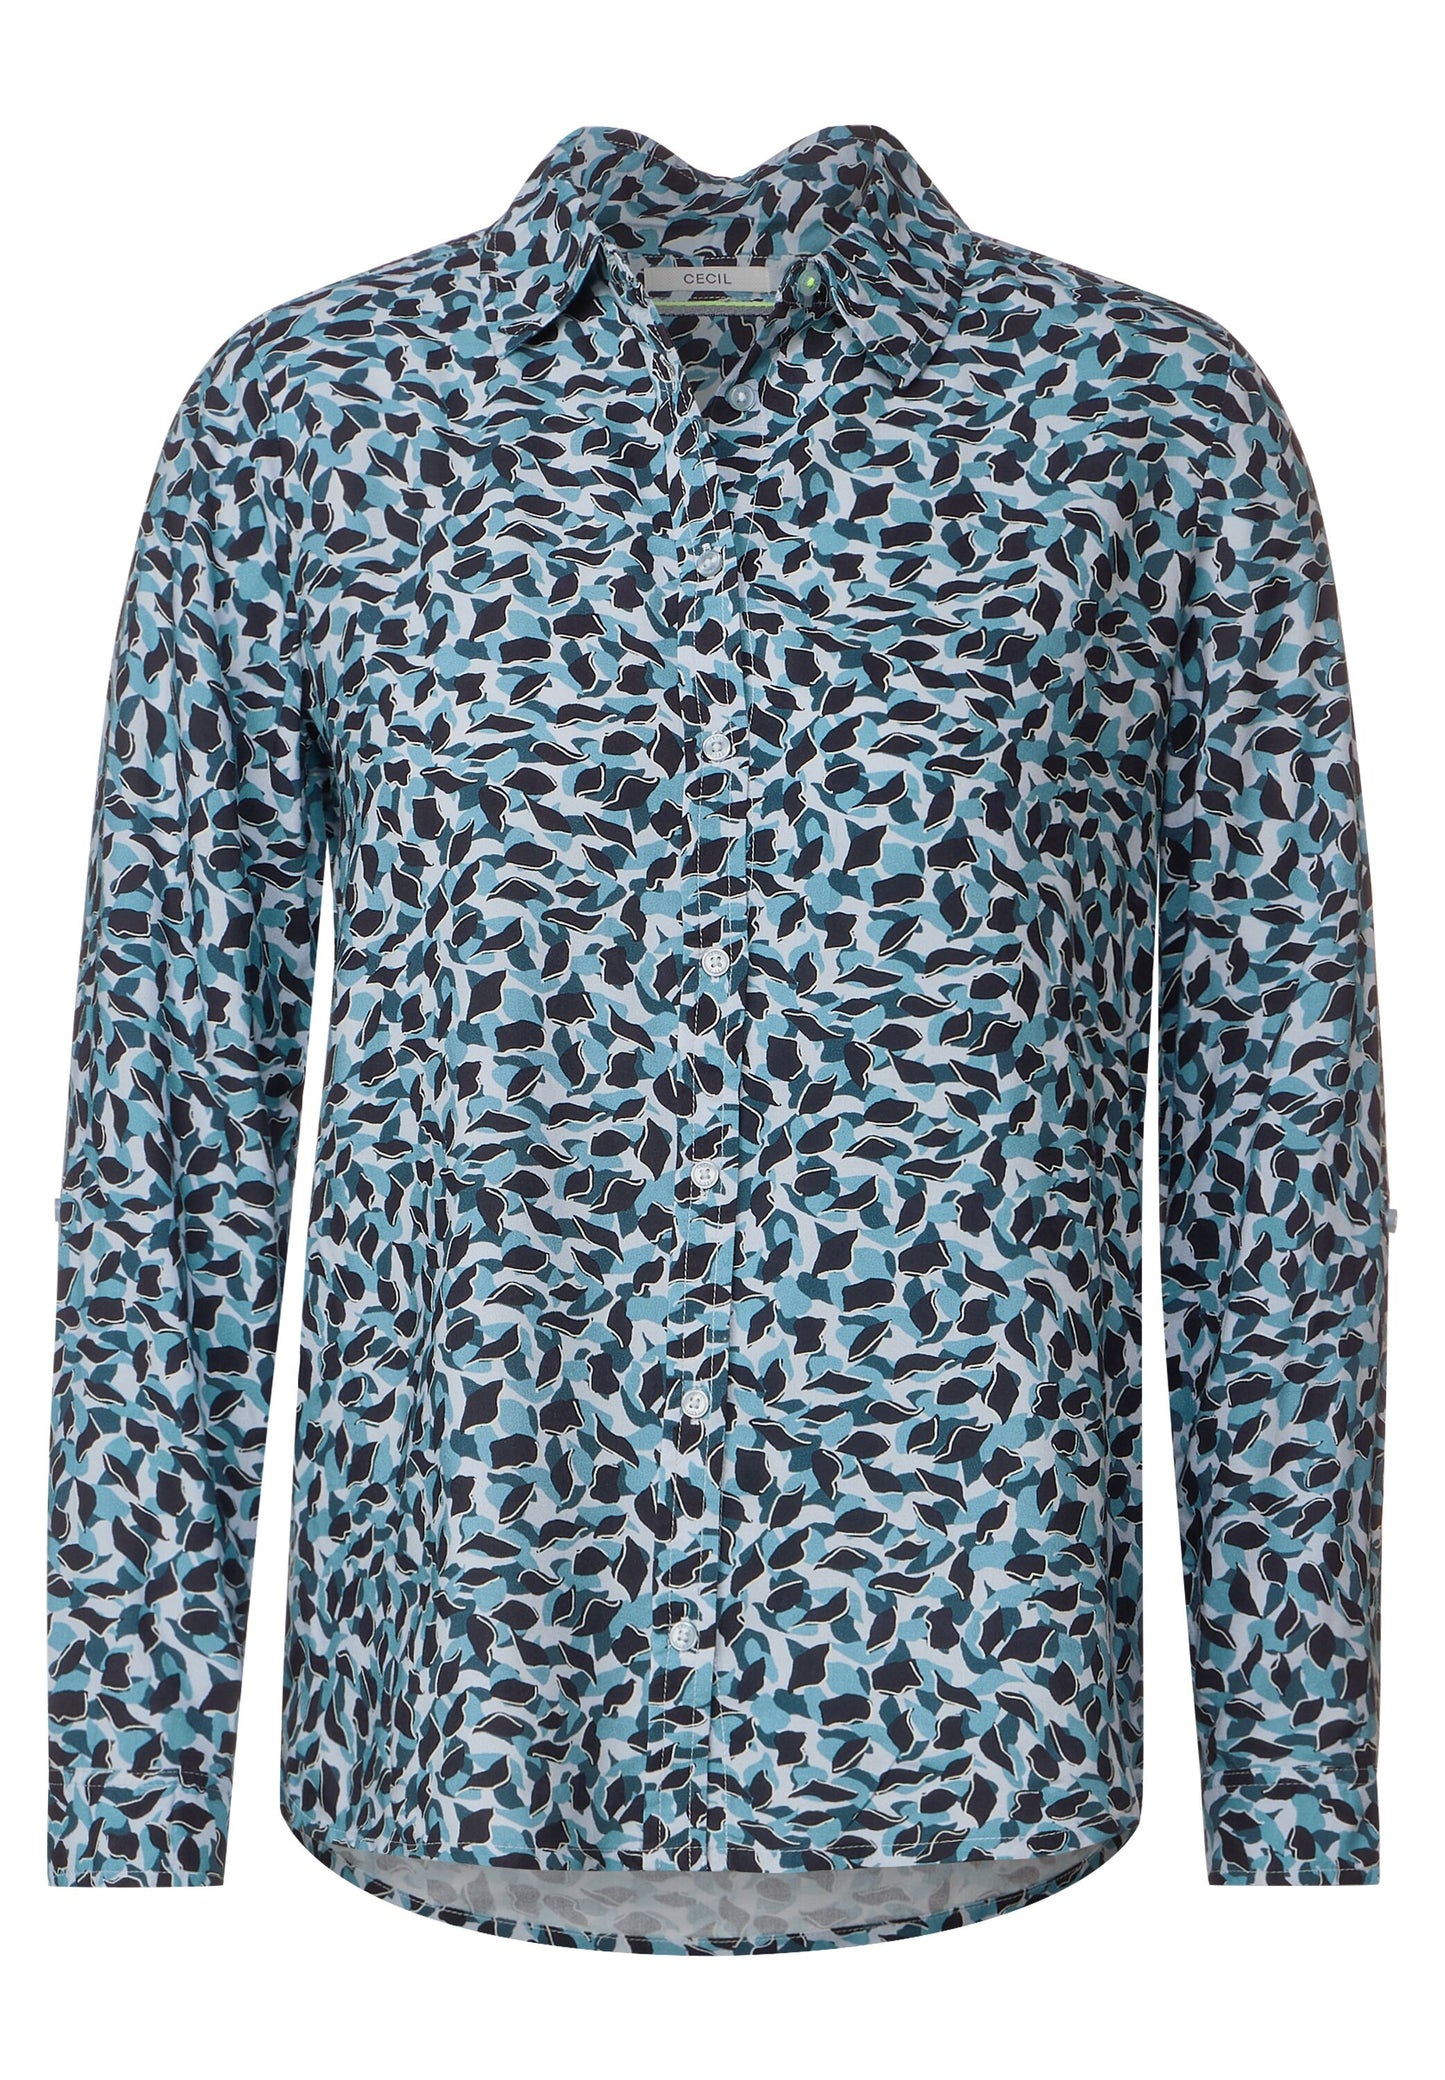 CECIL - Bluse mit grafischem Print - Farbe: strong petrol blue